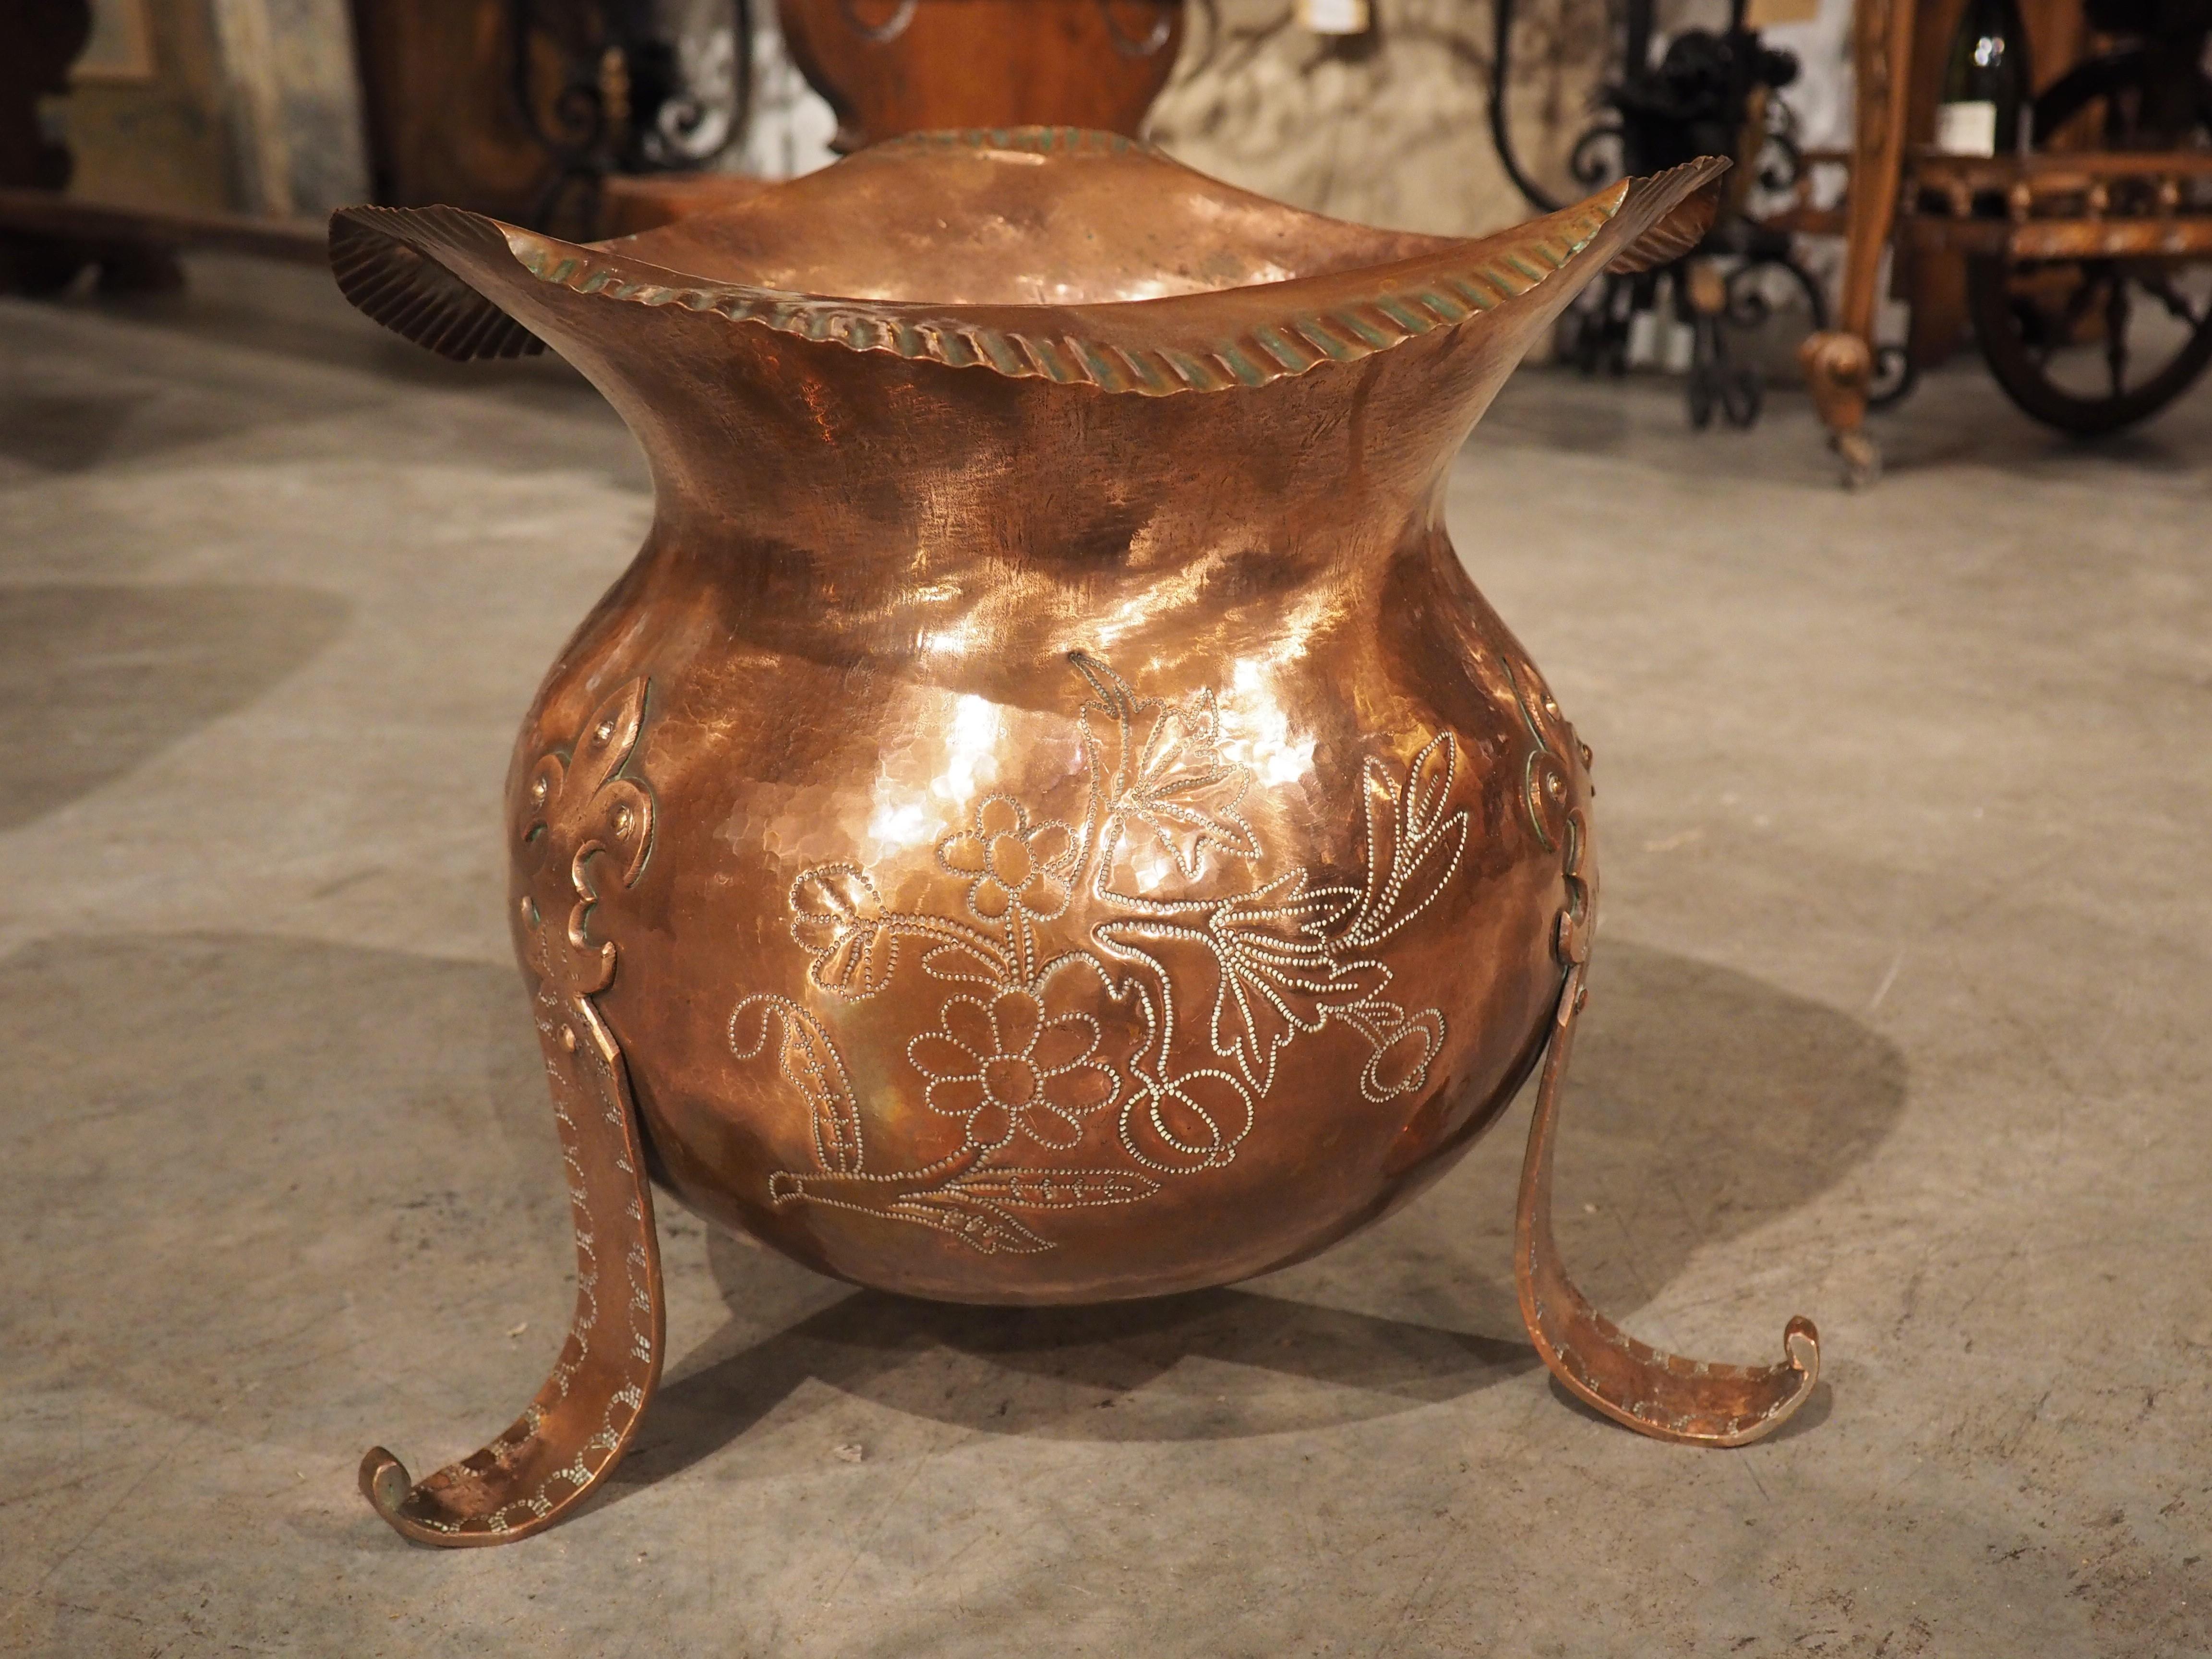 Early 1900s French Copper Cachepot Jardiniere with Scalloped Rim For Sale 6